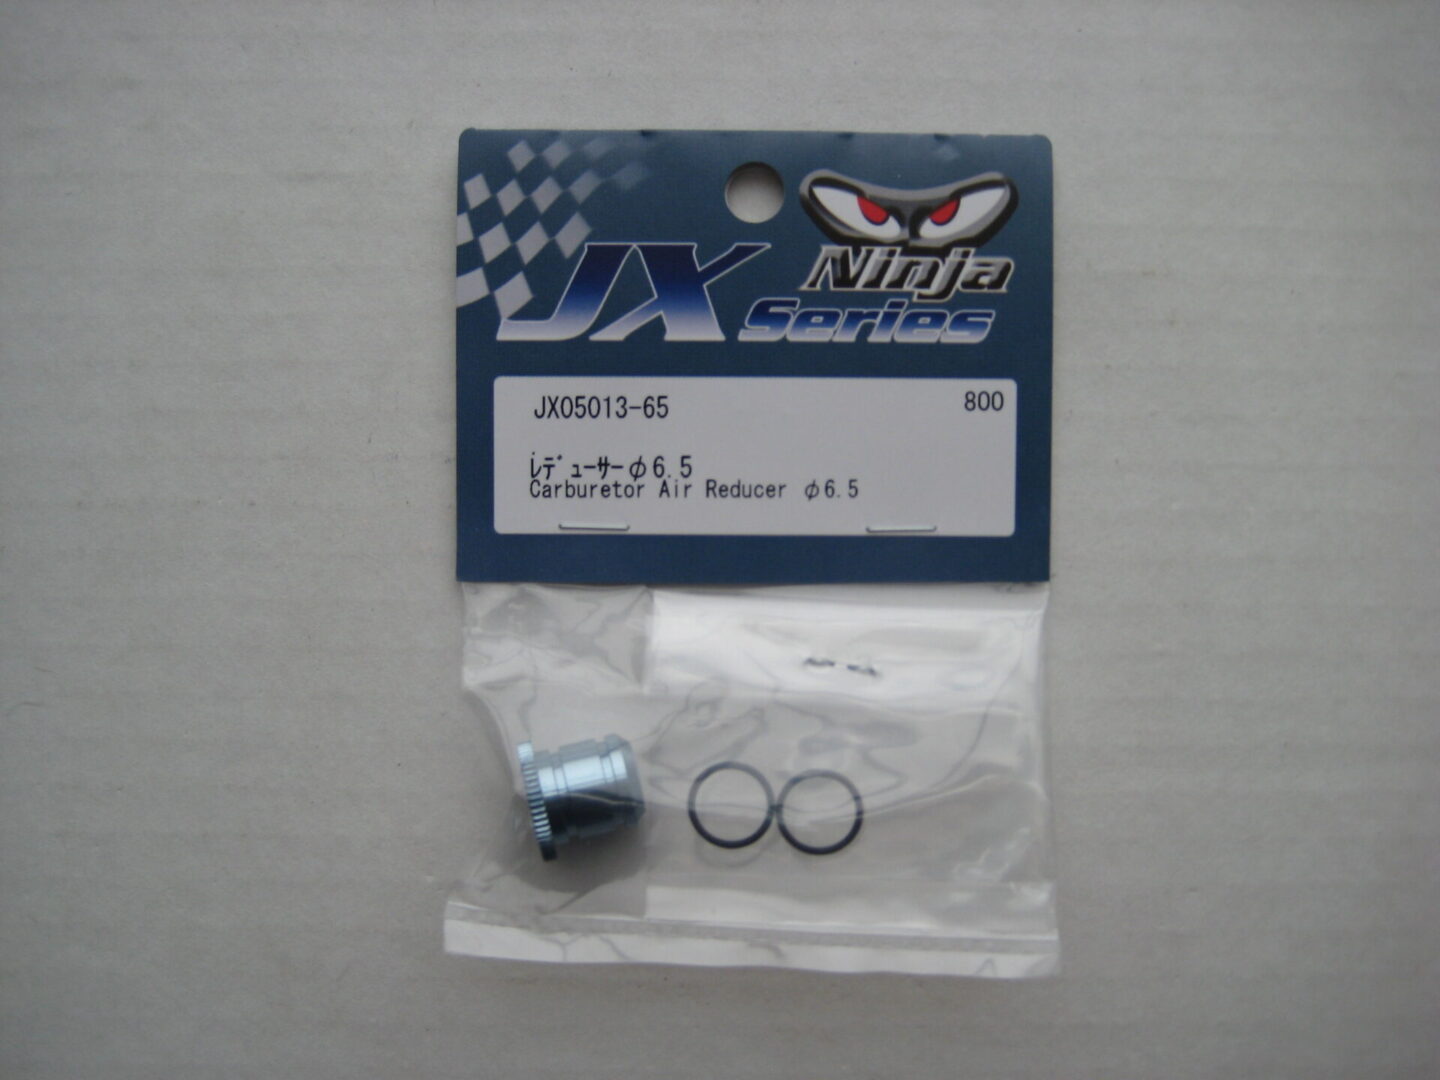 A picture of the parts for a racing car.